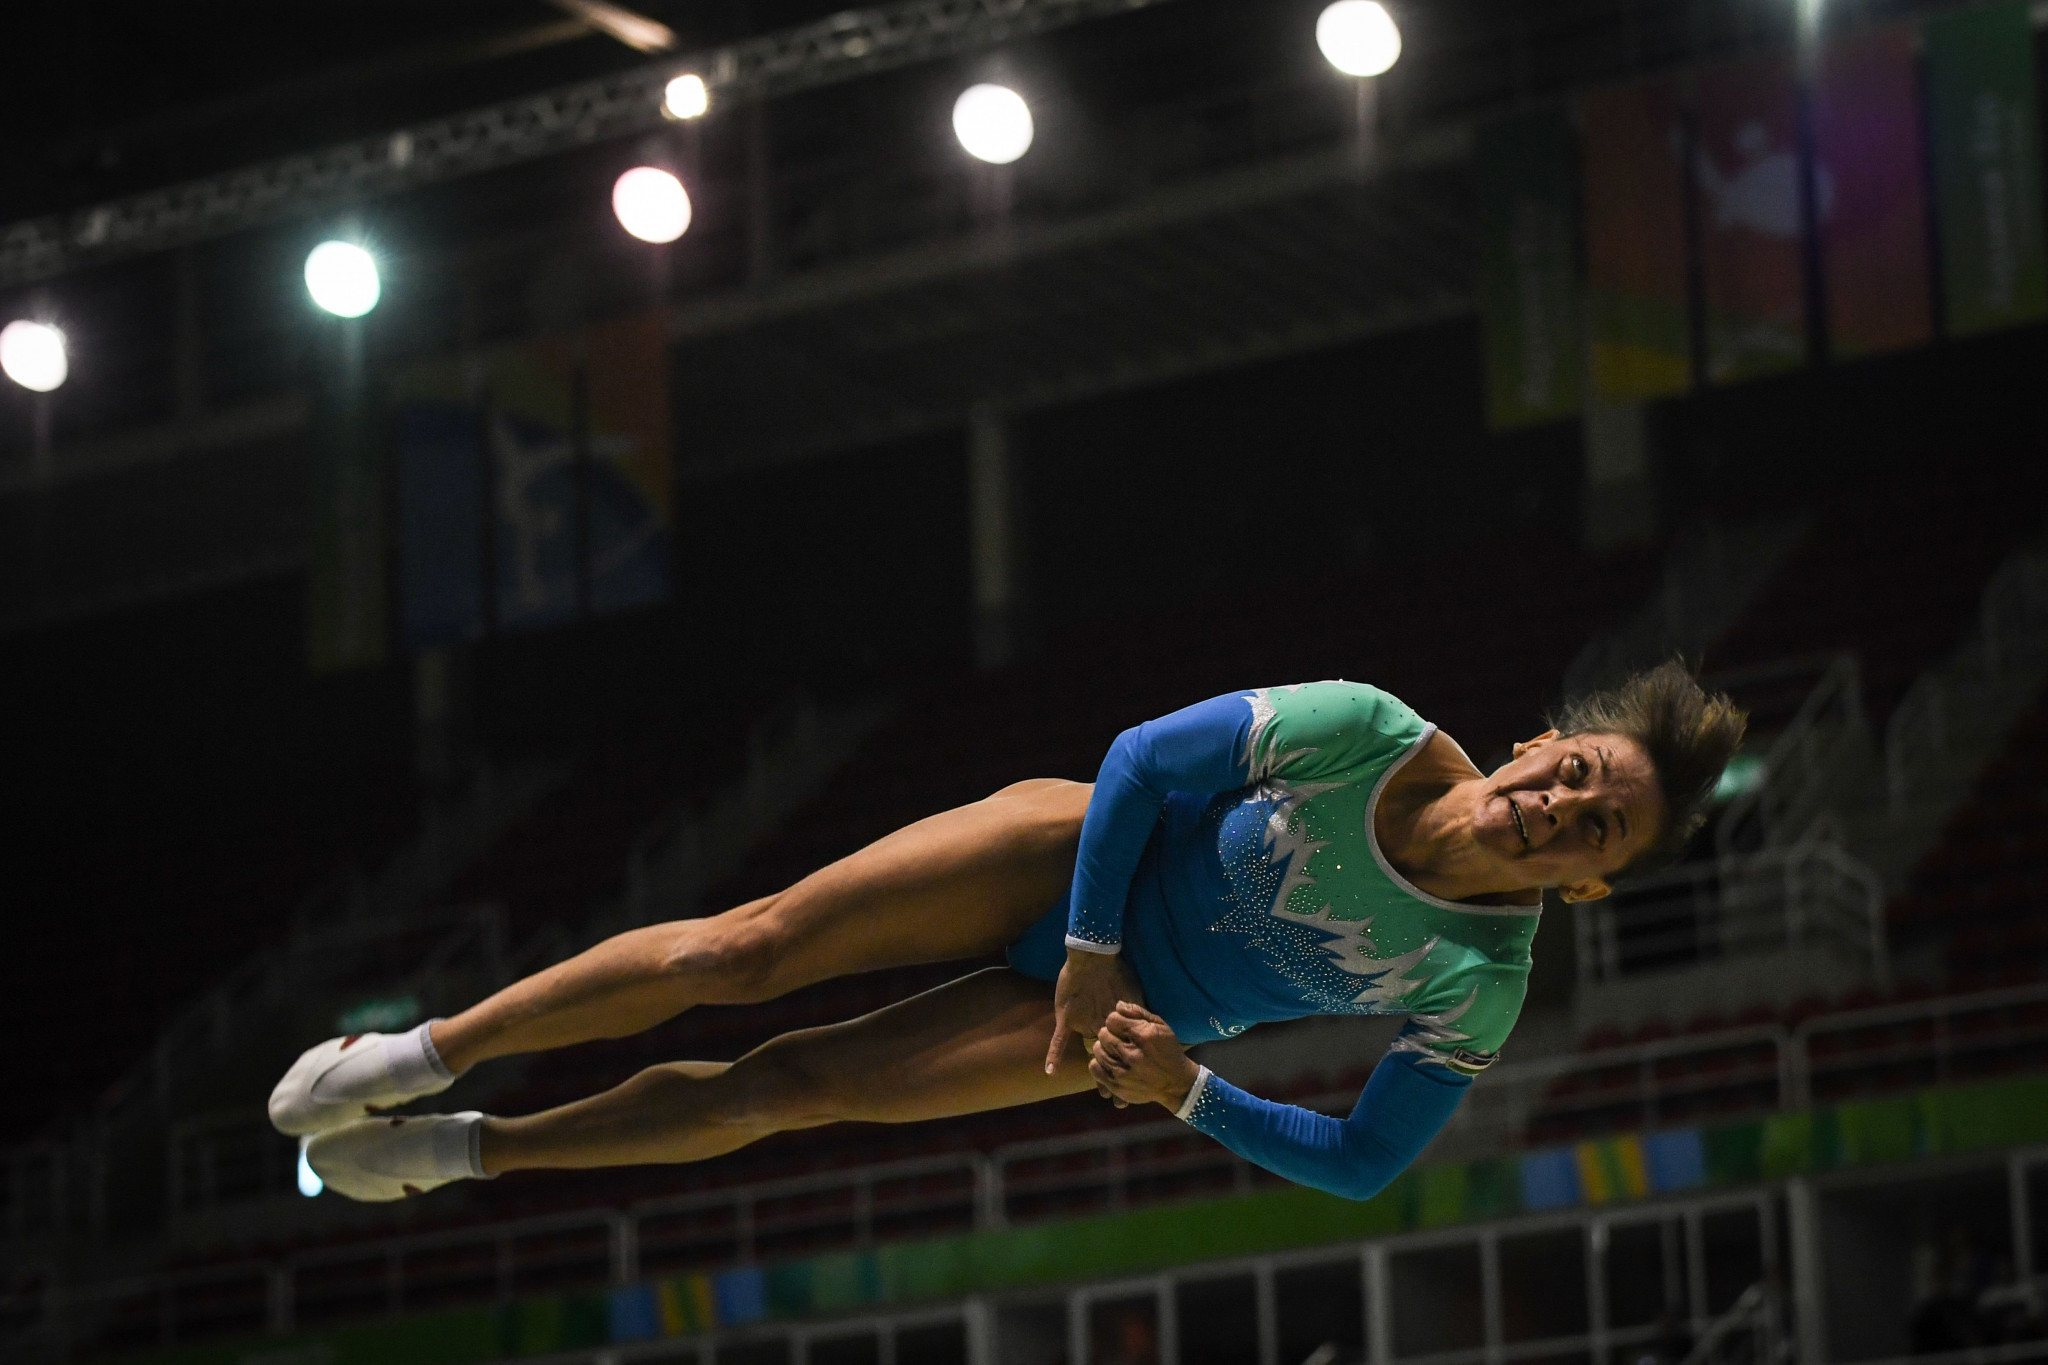 Uzbekistan veteran Oksana Chusovitina secured her 15th victory in the German city as she topped the podium in the women's vault ©Getty Images